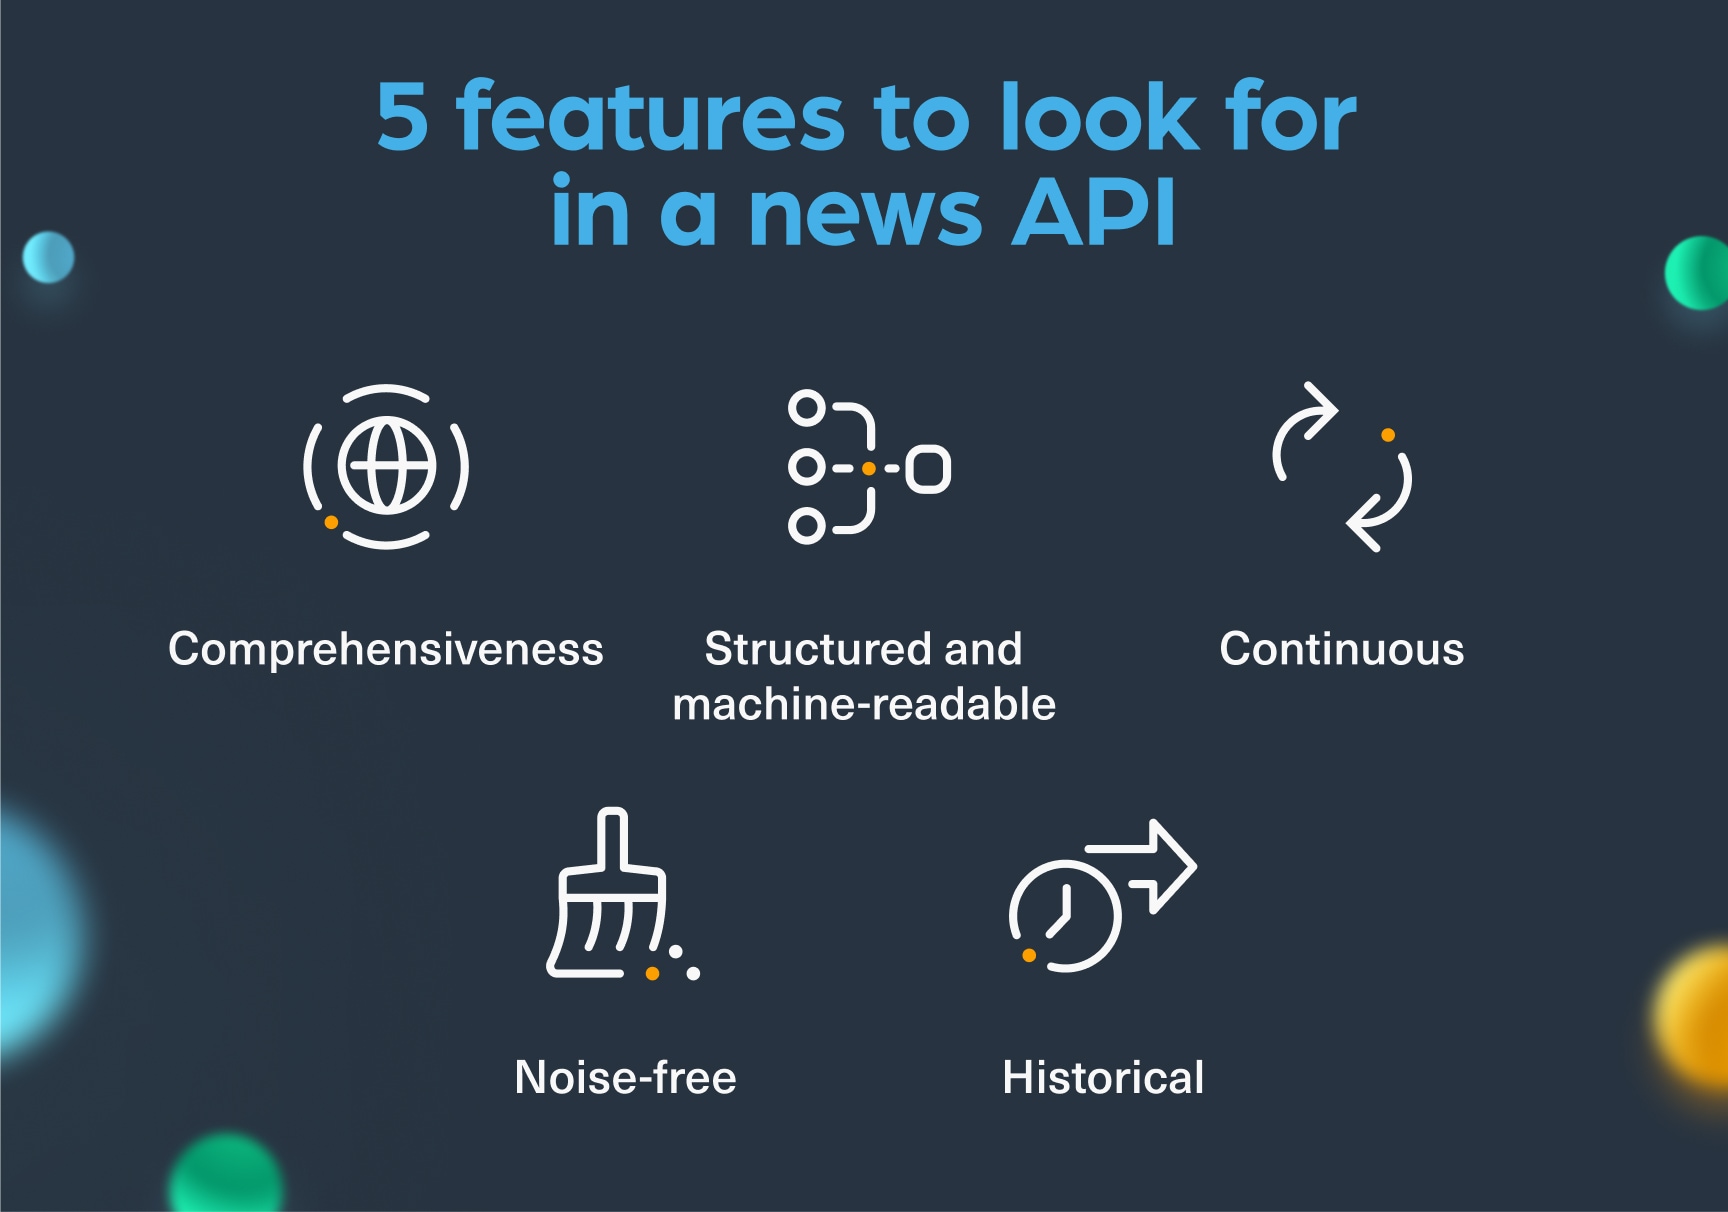 5 features to look for in a news API